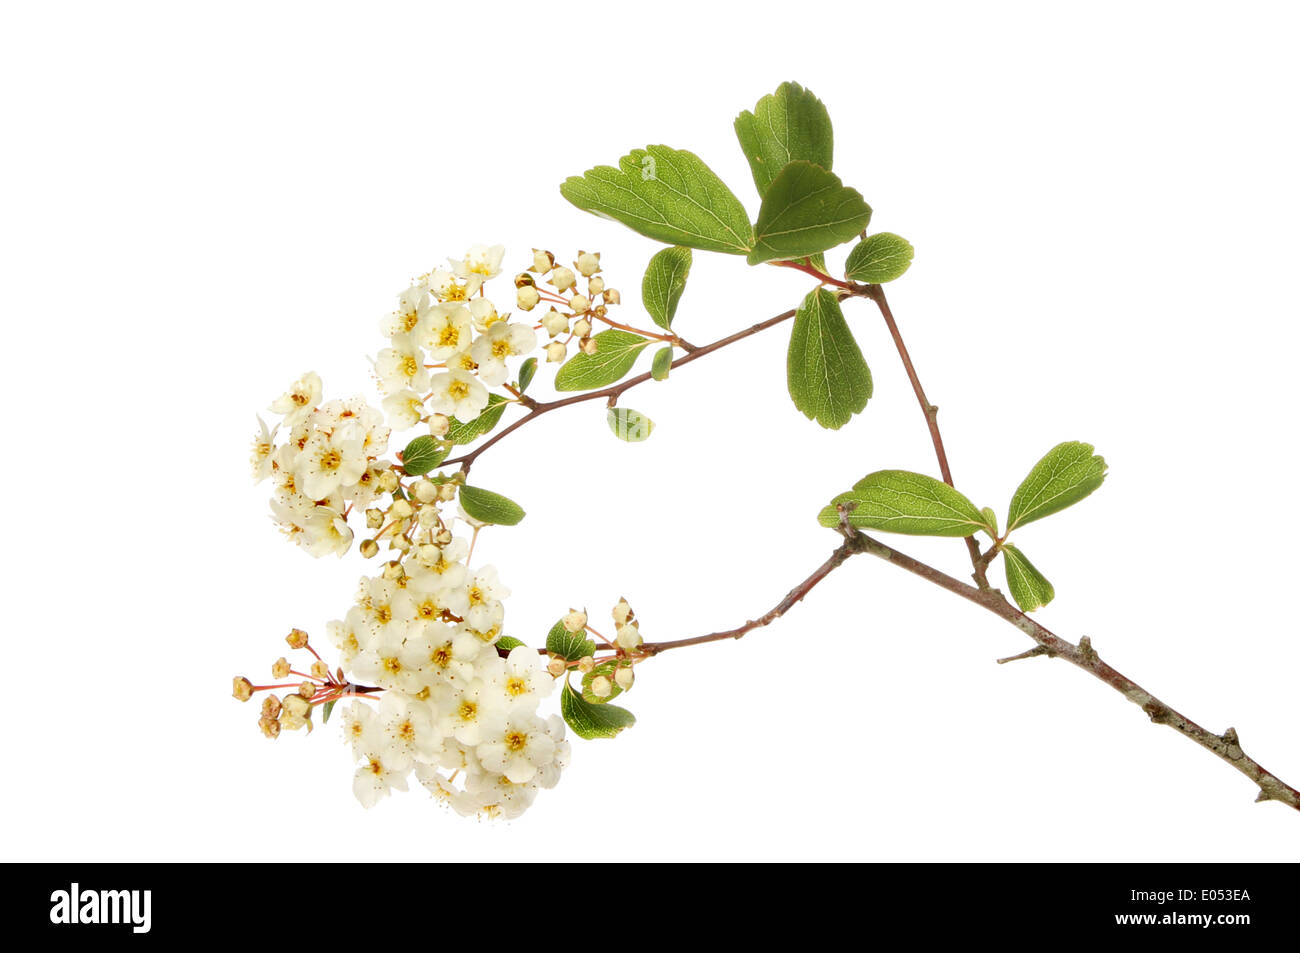 Flowers and foliage of a Spirea plant isolated against white Stock Photo